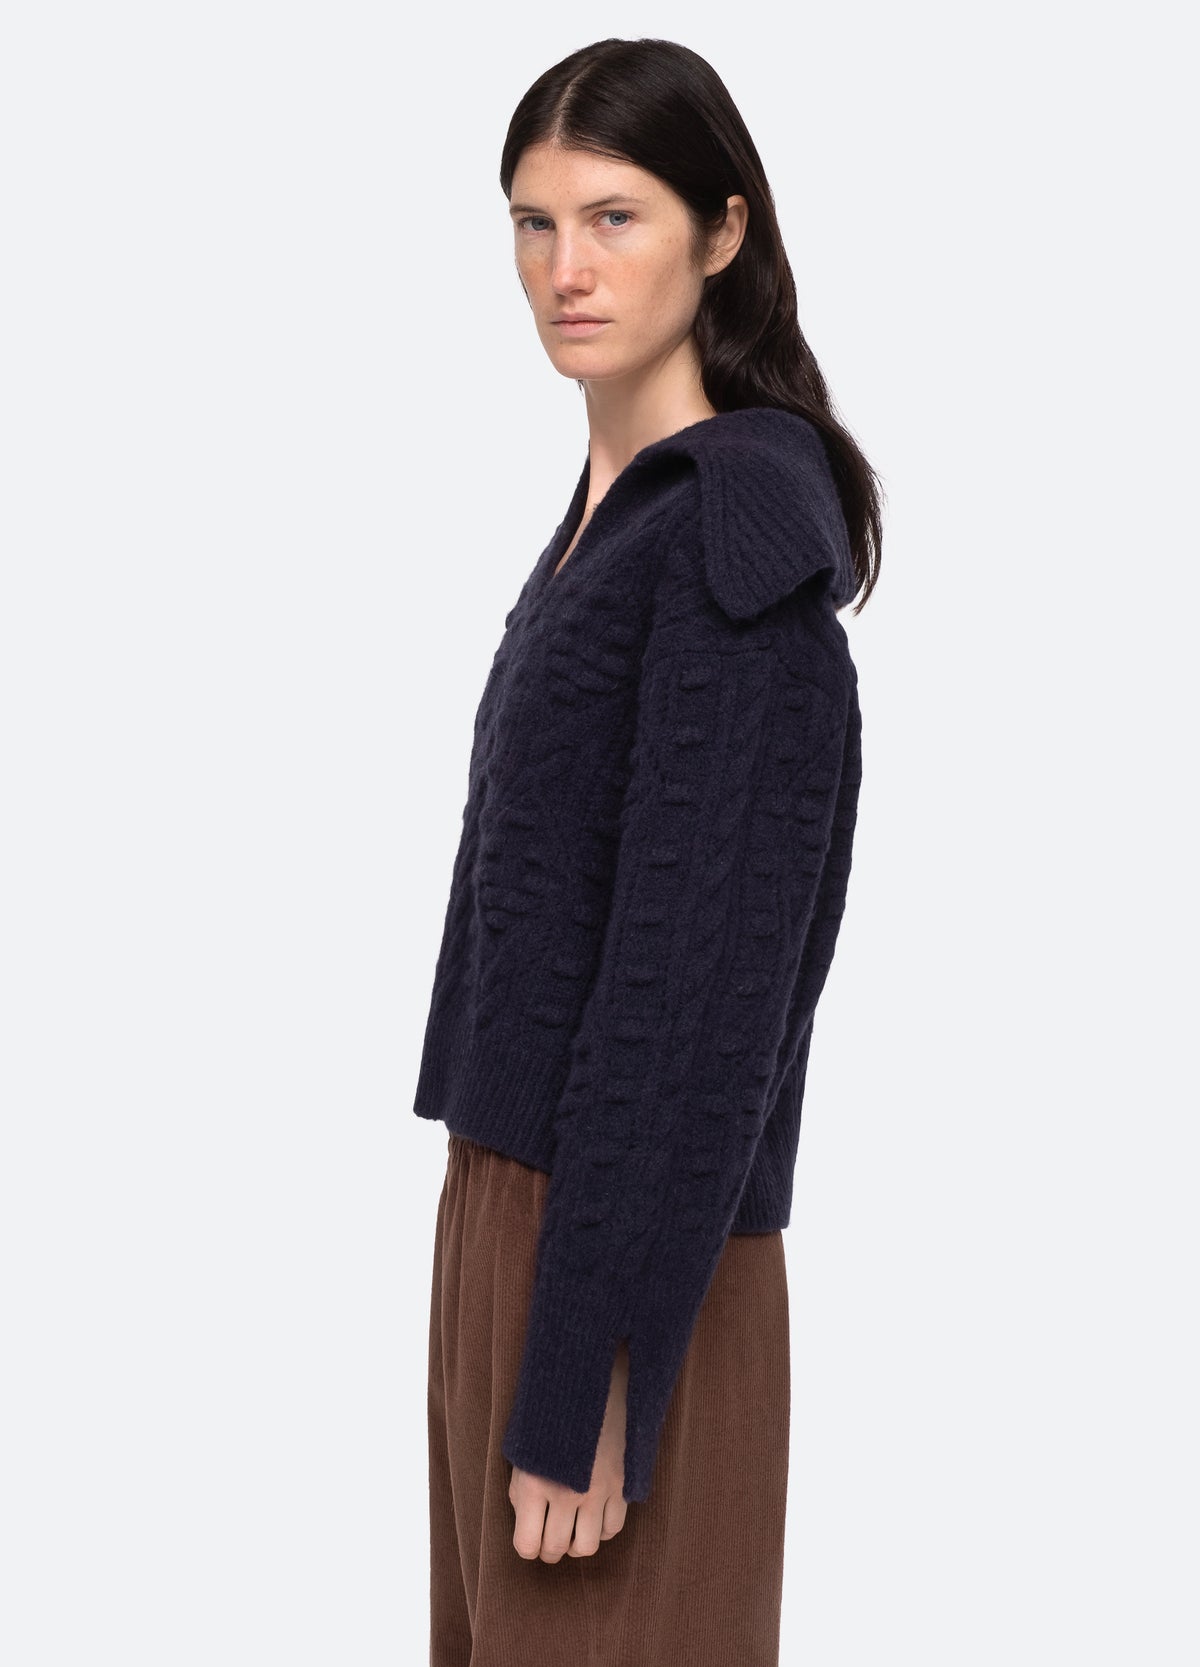 navy-cele sweater-side view - 9